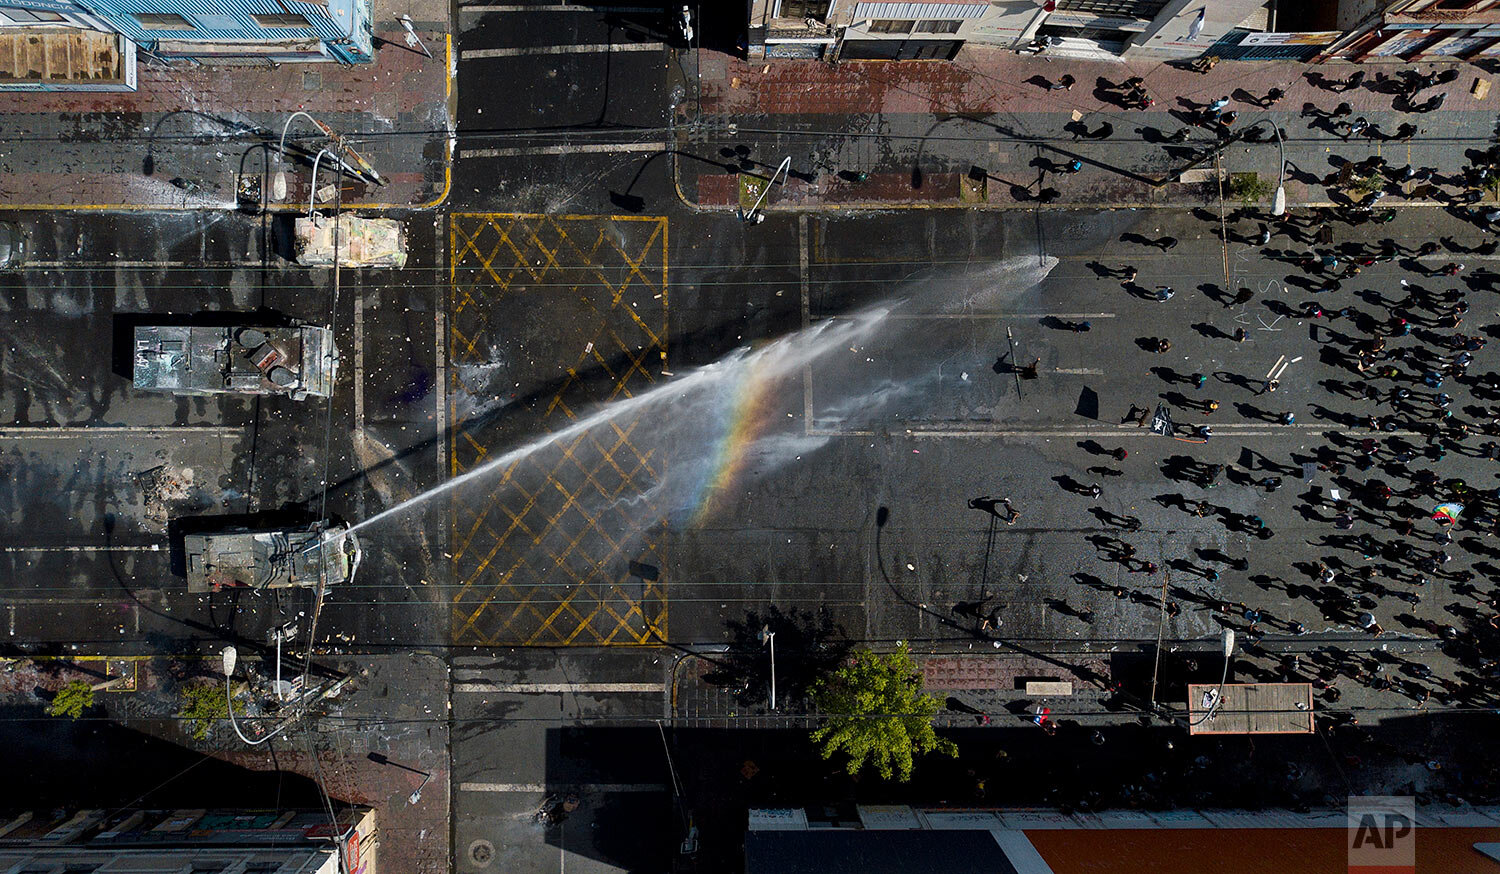  A police water cannon sprays anti-government demonstrators in Valparaiso, Chile, on Oct. 26, 2019. (AP Photo/Matias Delacroix) 